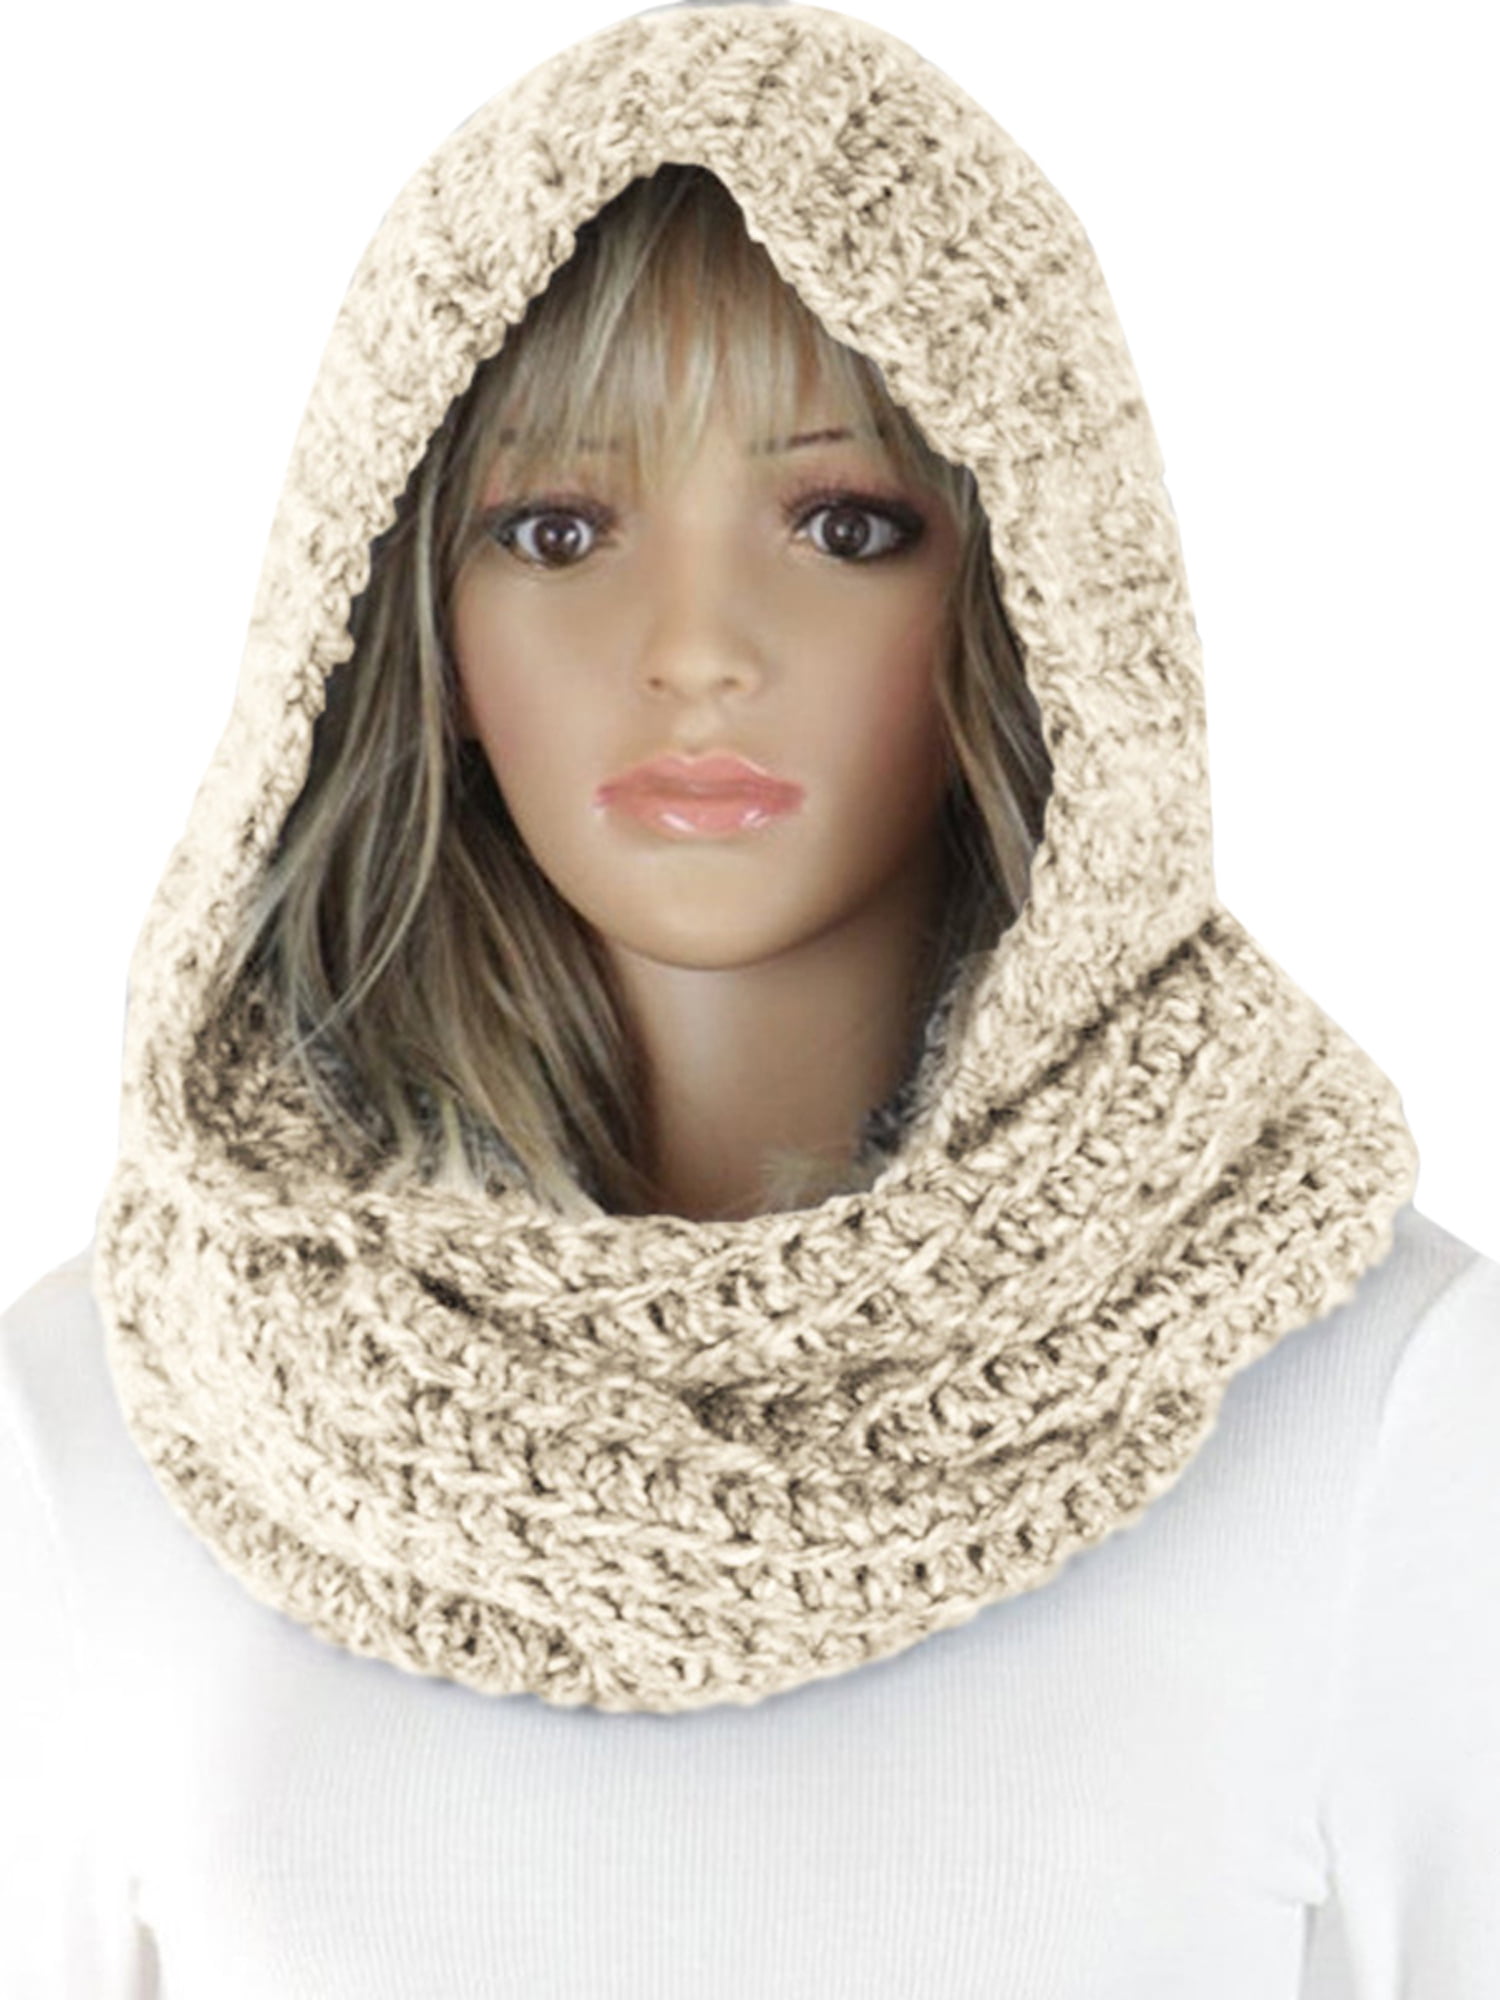 Children’s Winter Knitted Hooded Scarf Neck Ear Warmer Wrap Solid Color Scarves